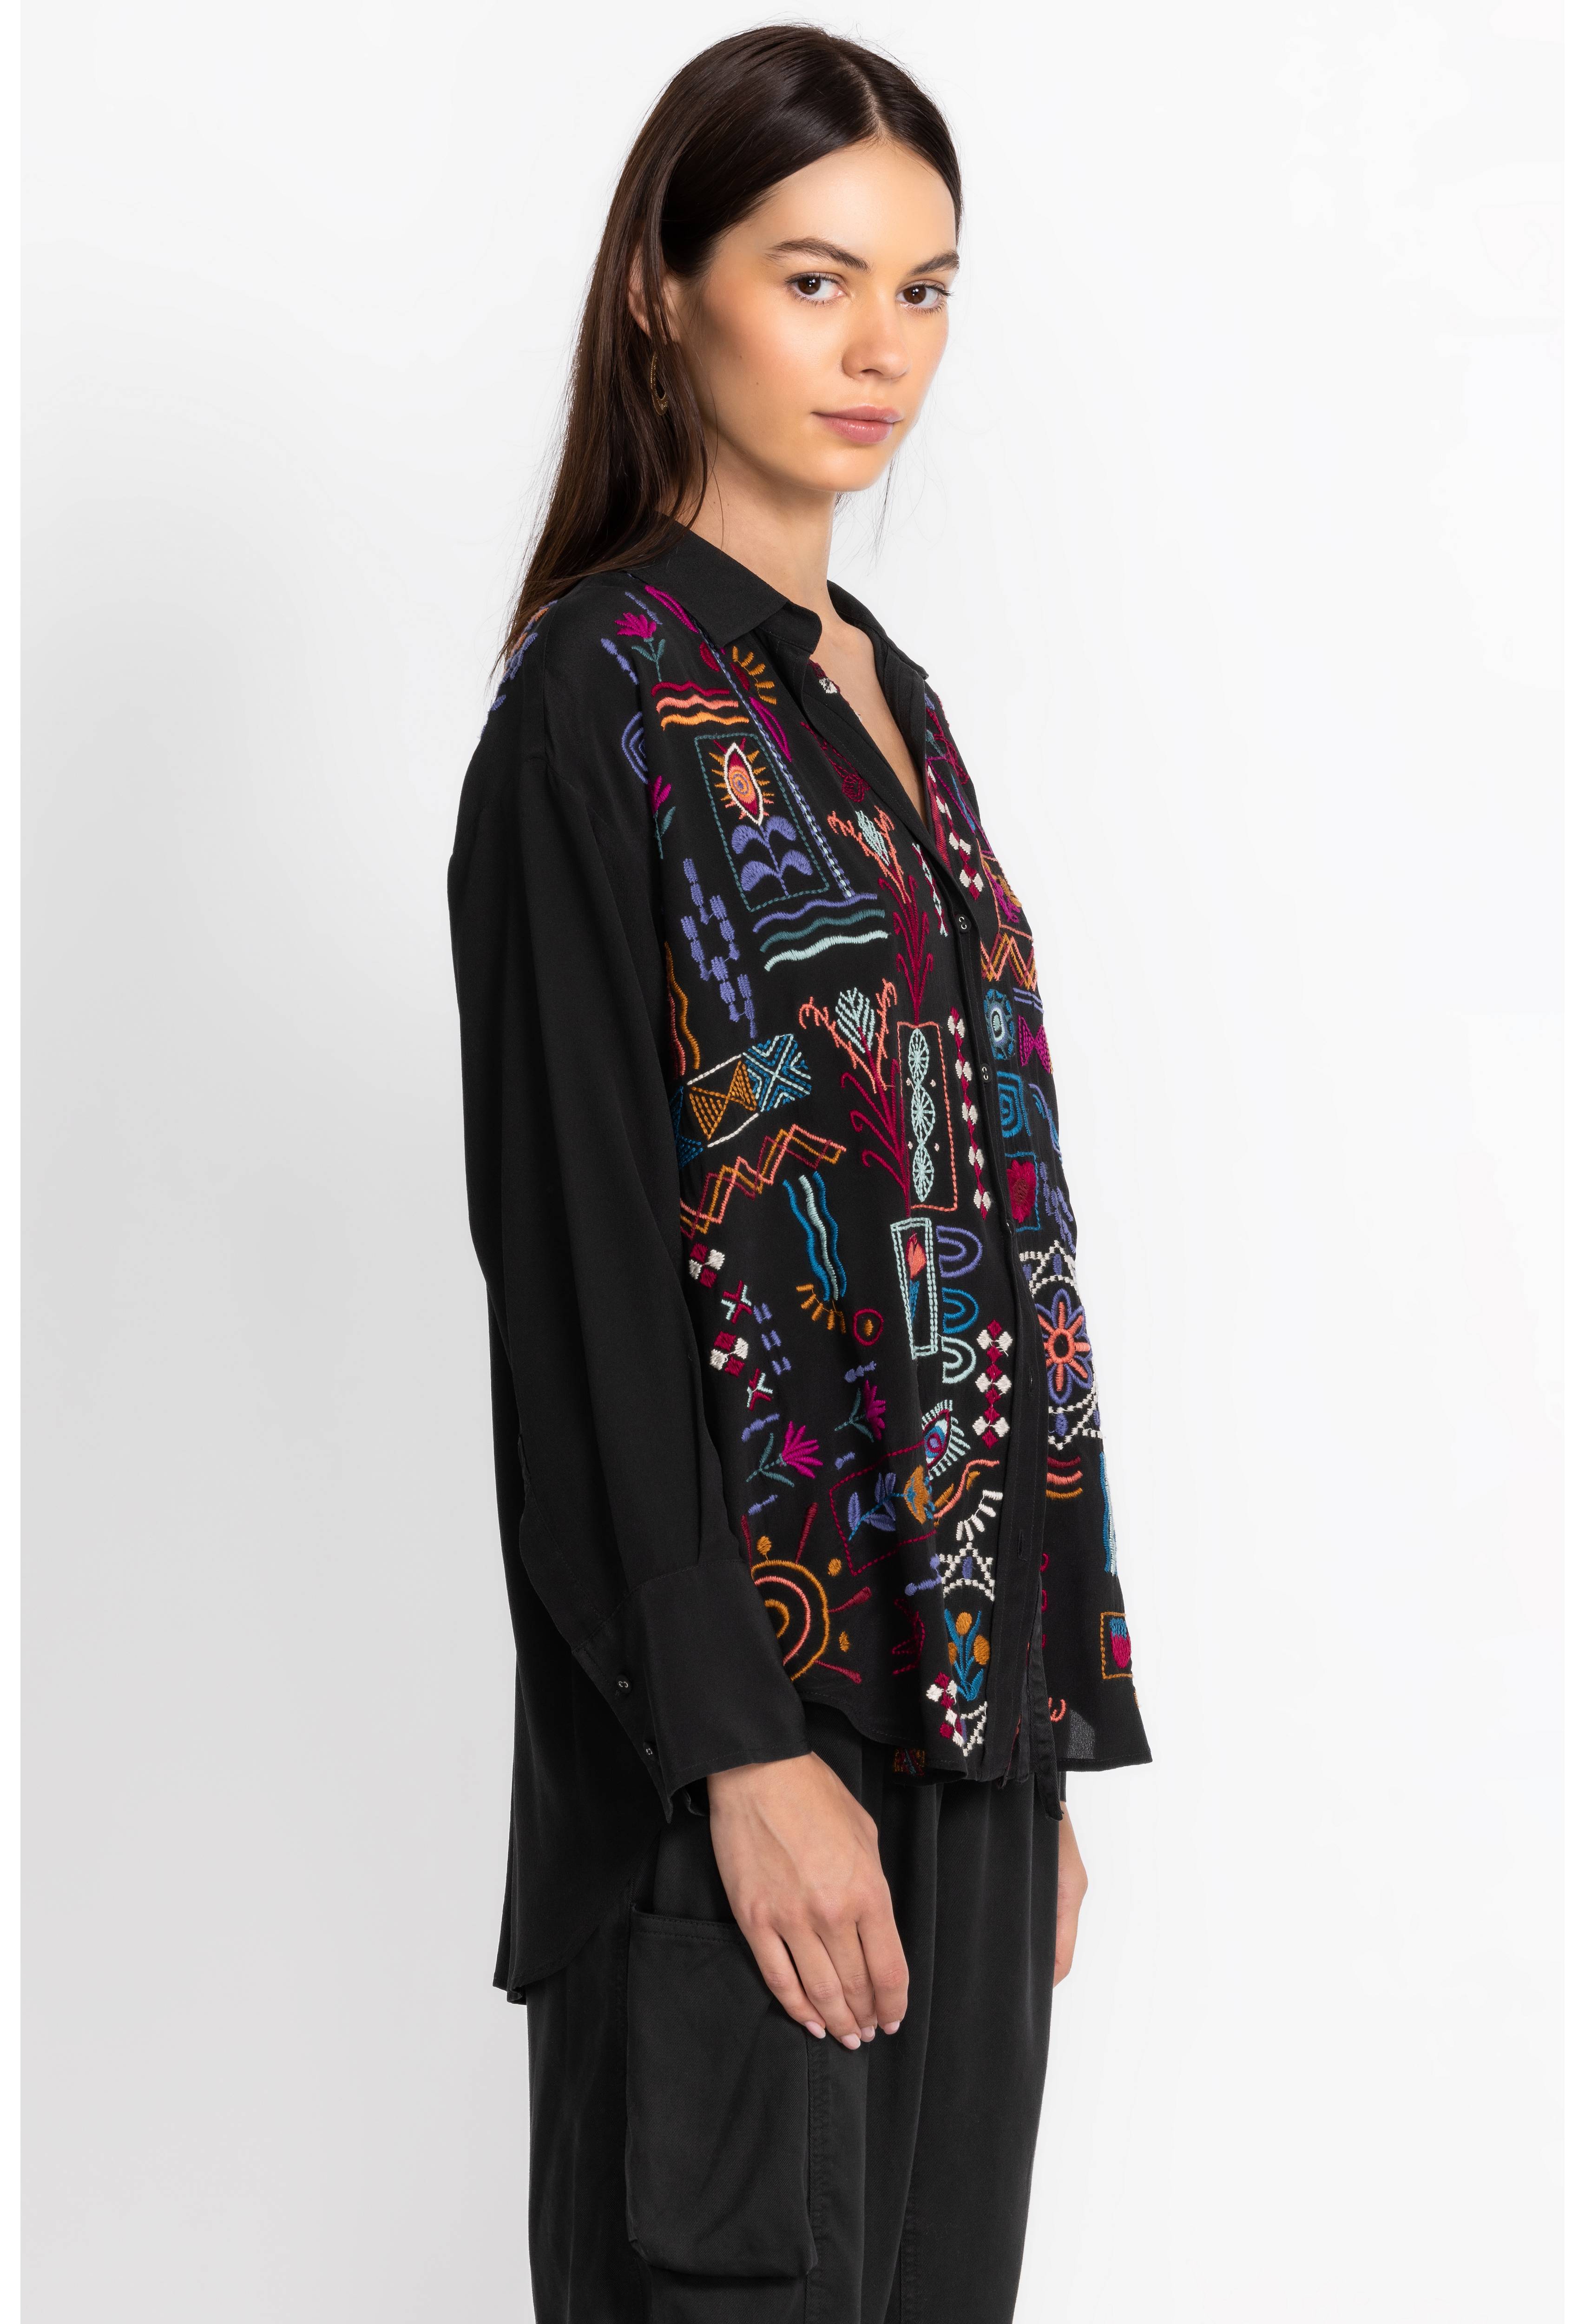 Campo Relaxed Oversized Shirt, , large image number 2